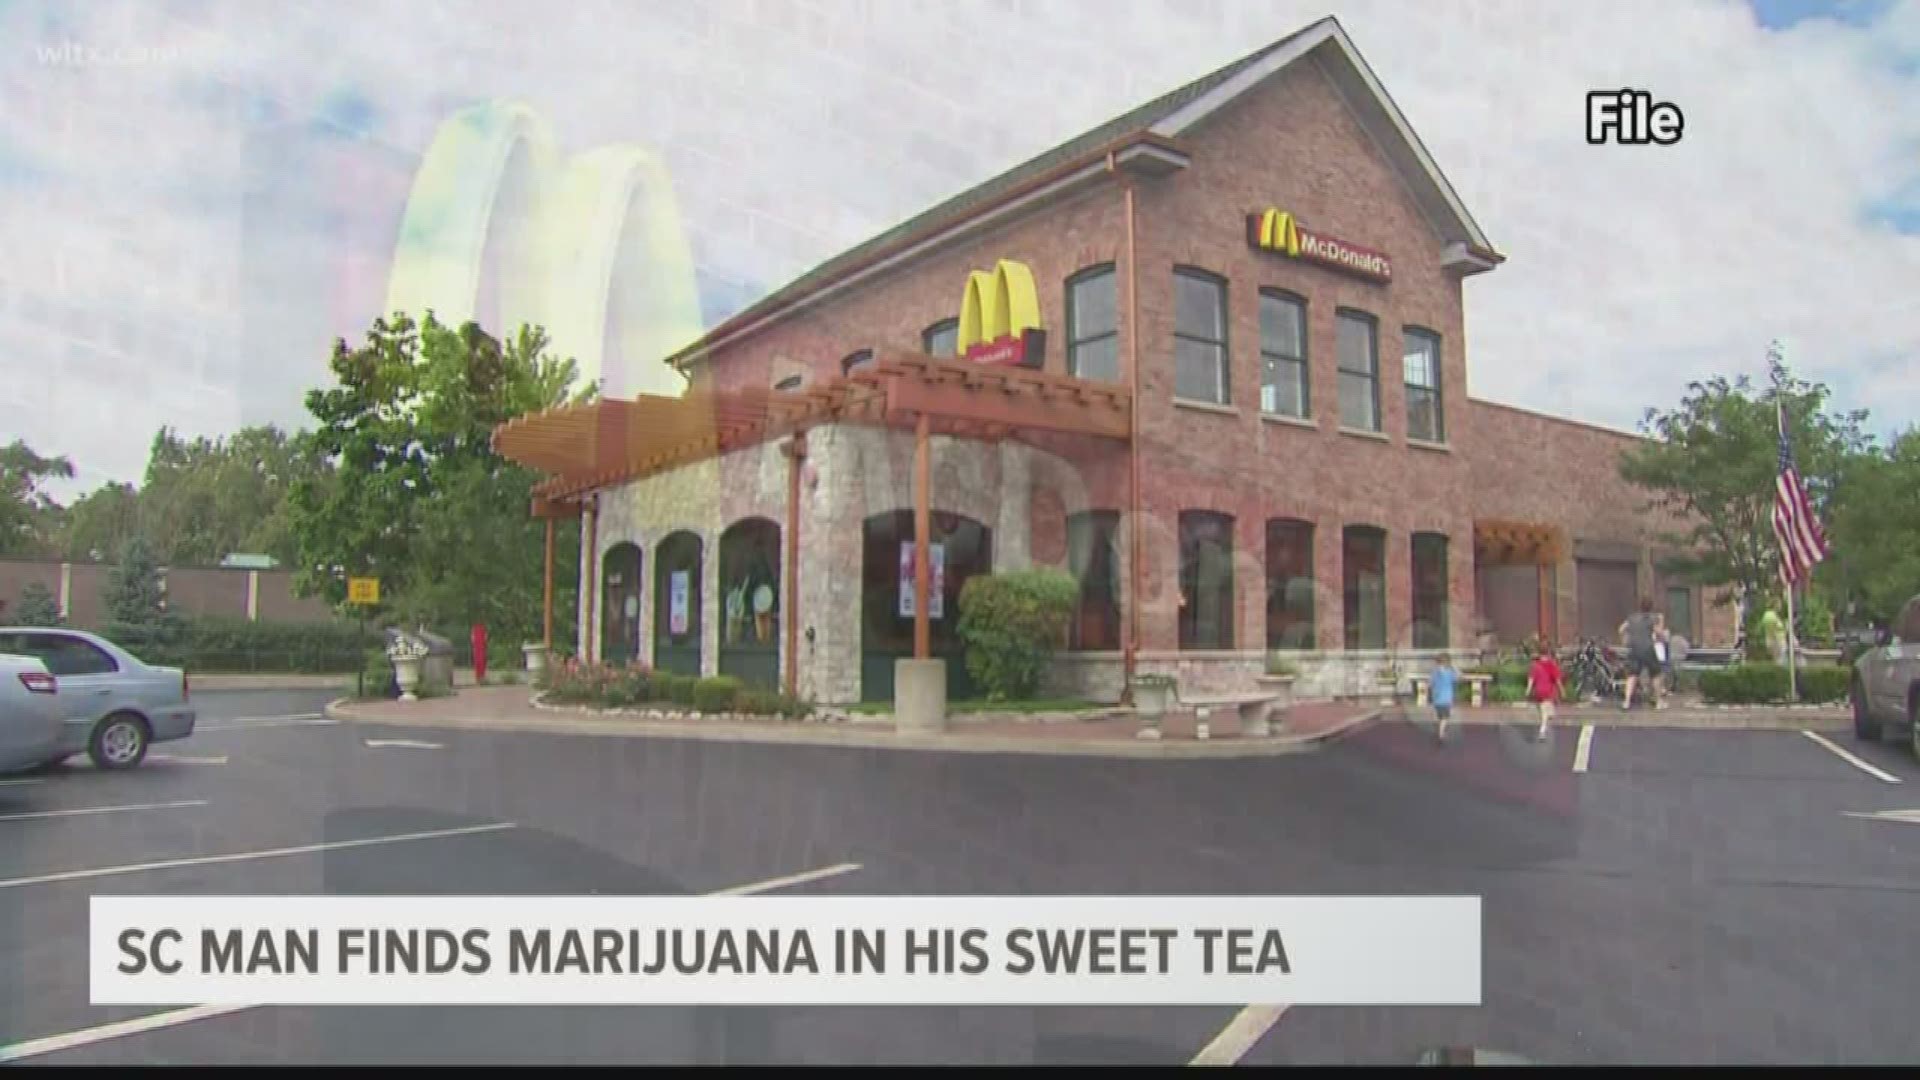 In Hilton Head, a man went to a McDonald's for a sweet tea and says he received a little extra herbal substance on the side.